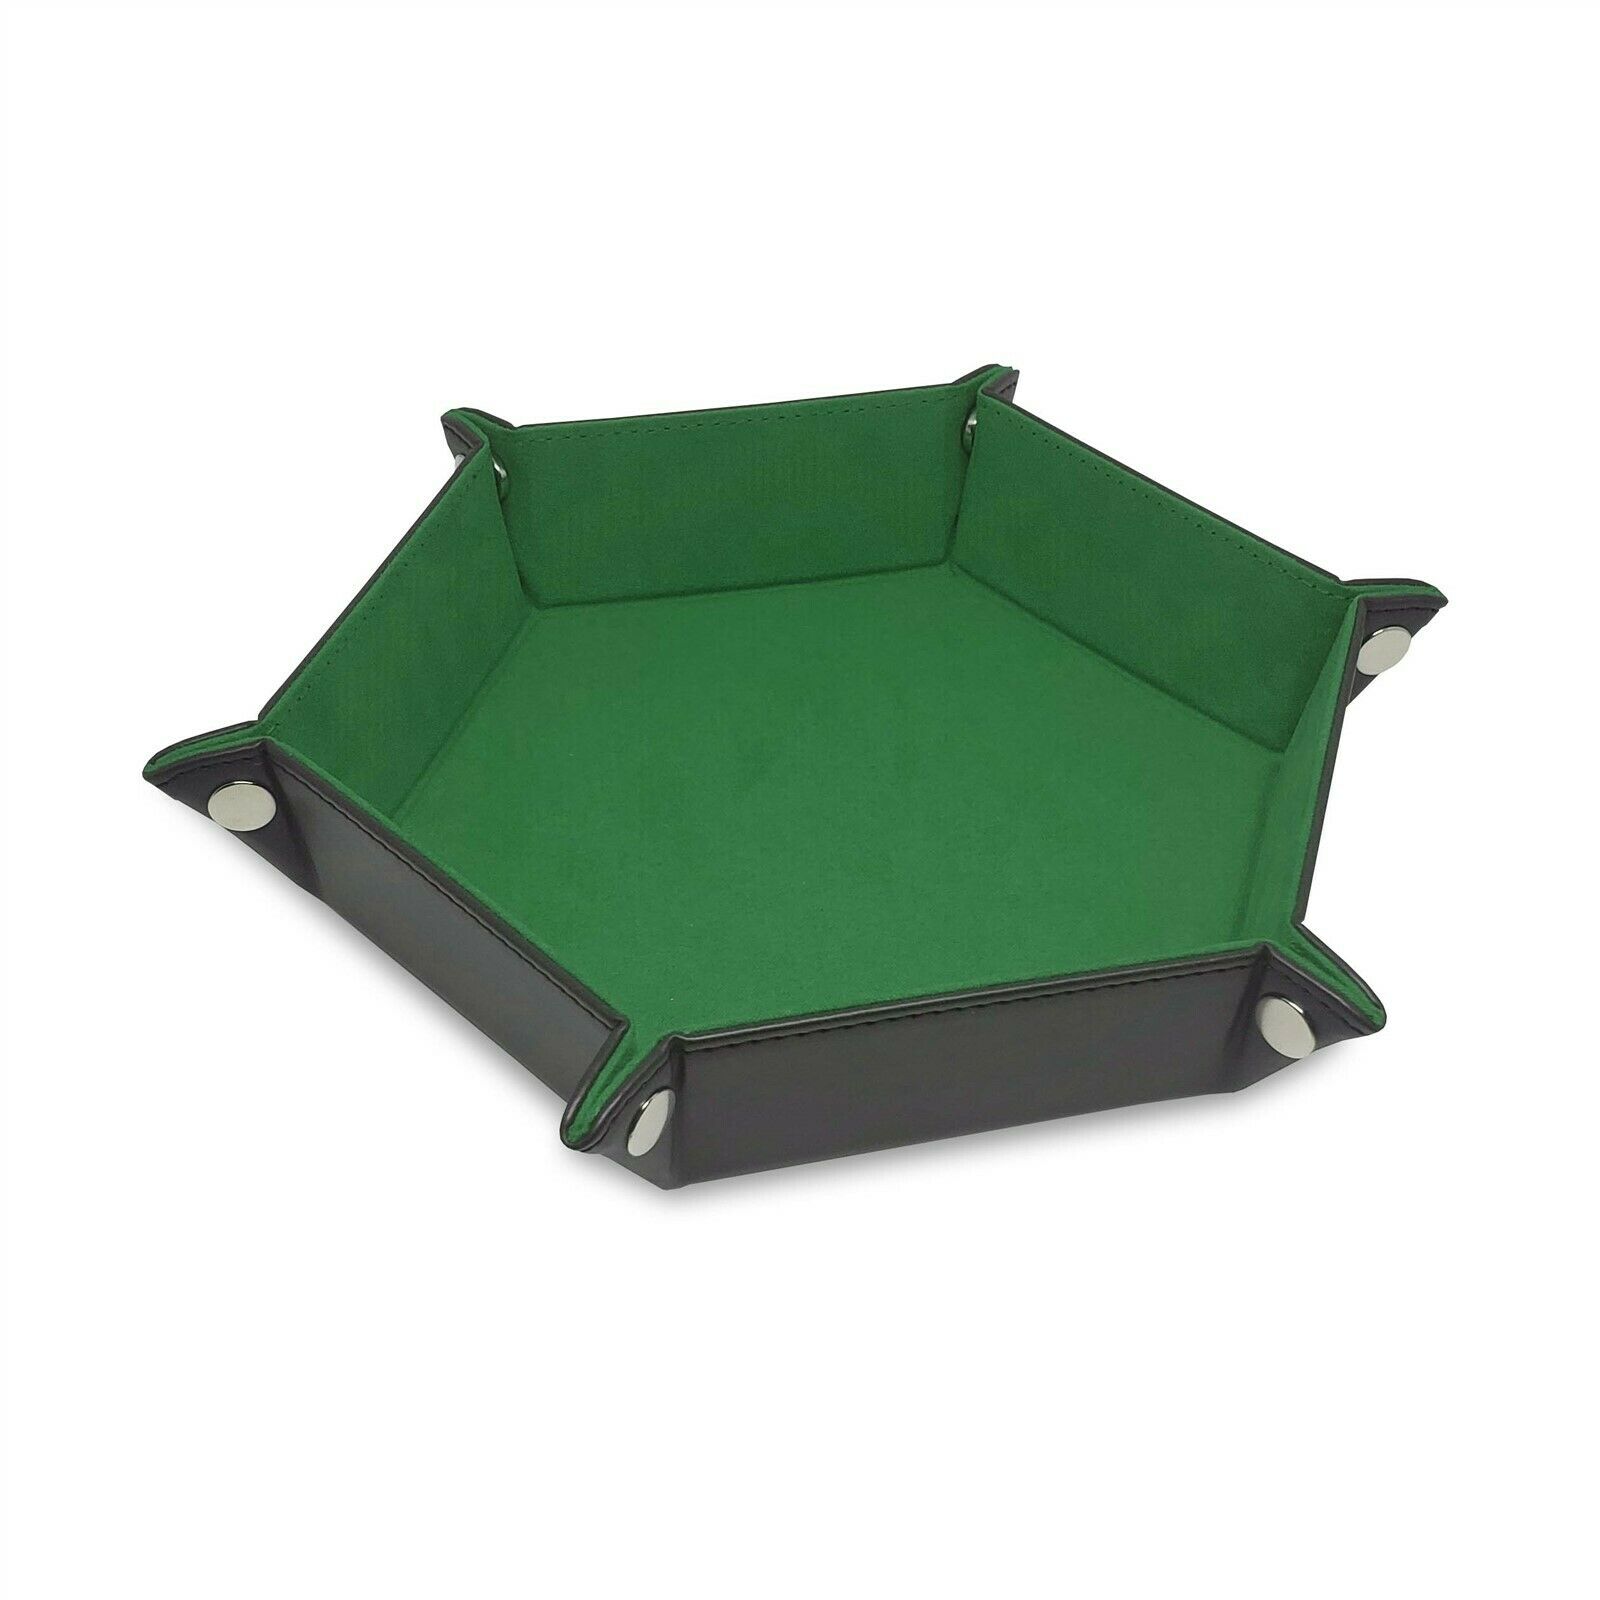 Bcw Folding Hexagon Dice Tray Pu Leather Green Suede Dungeons Dragons Pathfinder